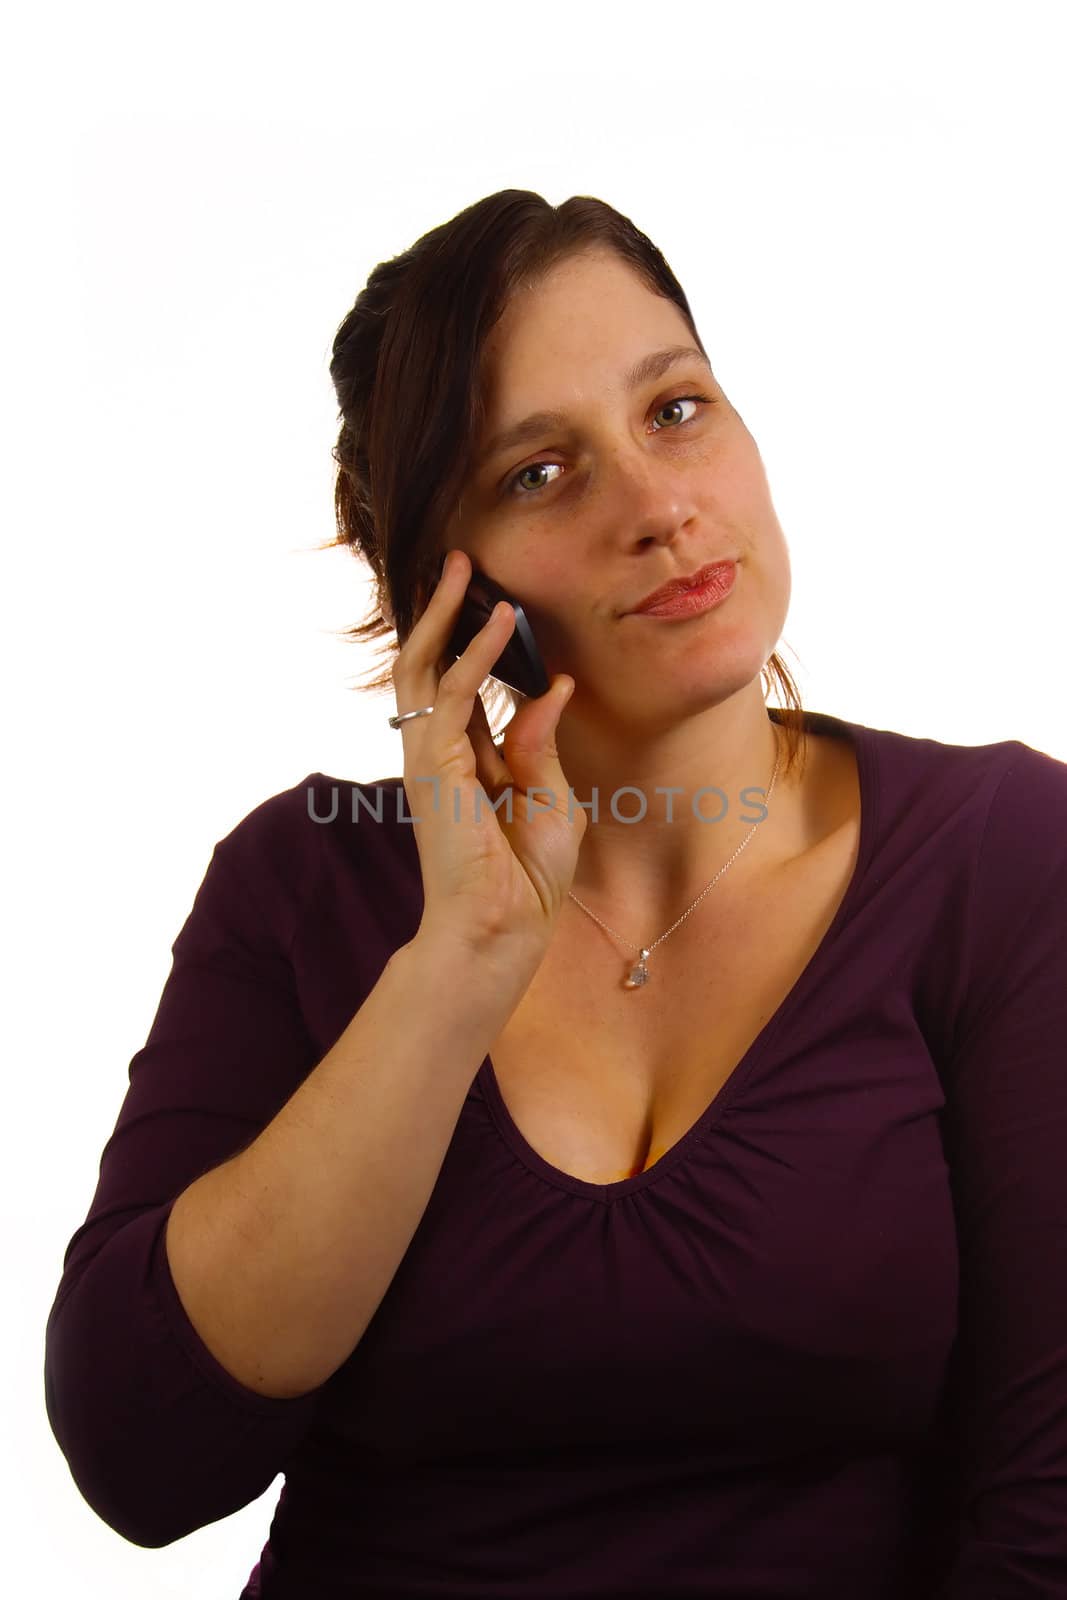 Woman on the phone, isolated on white background